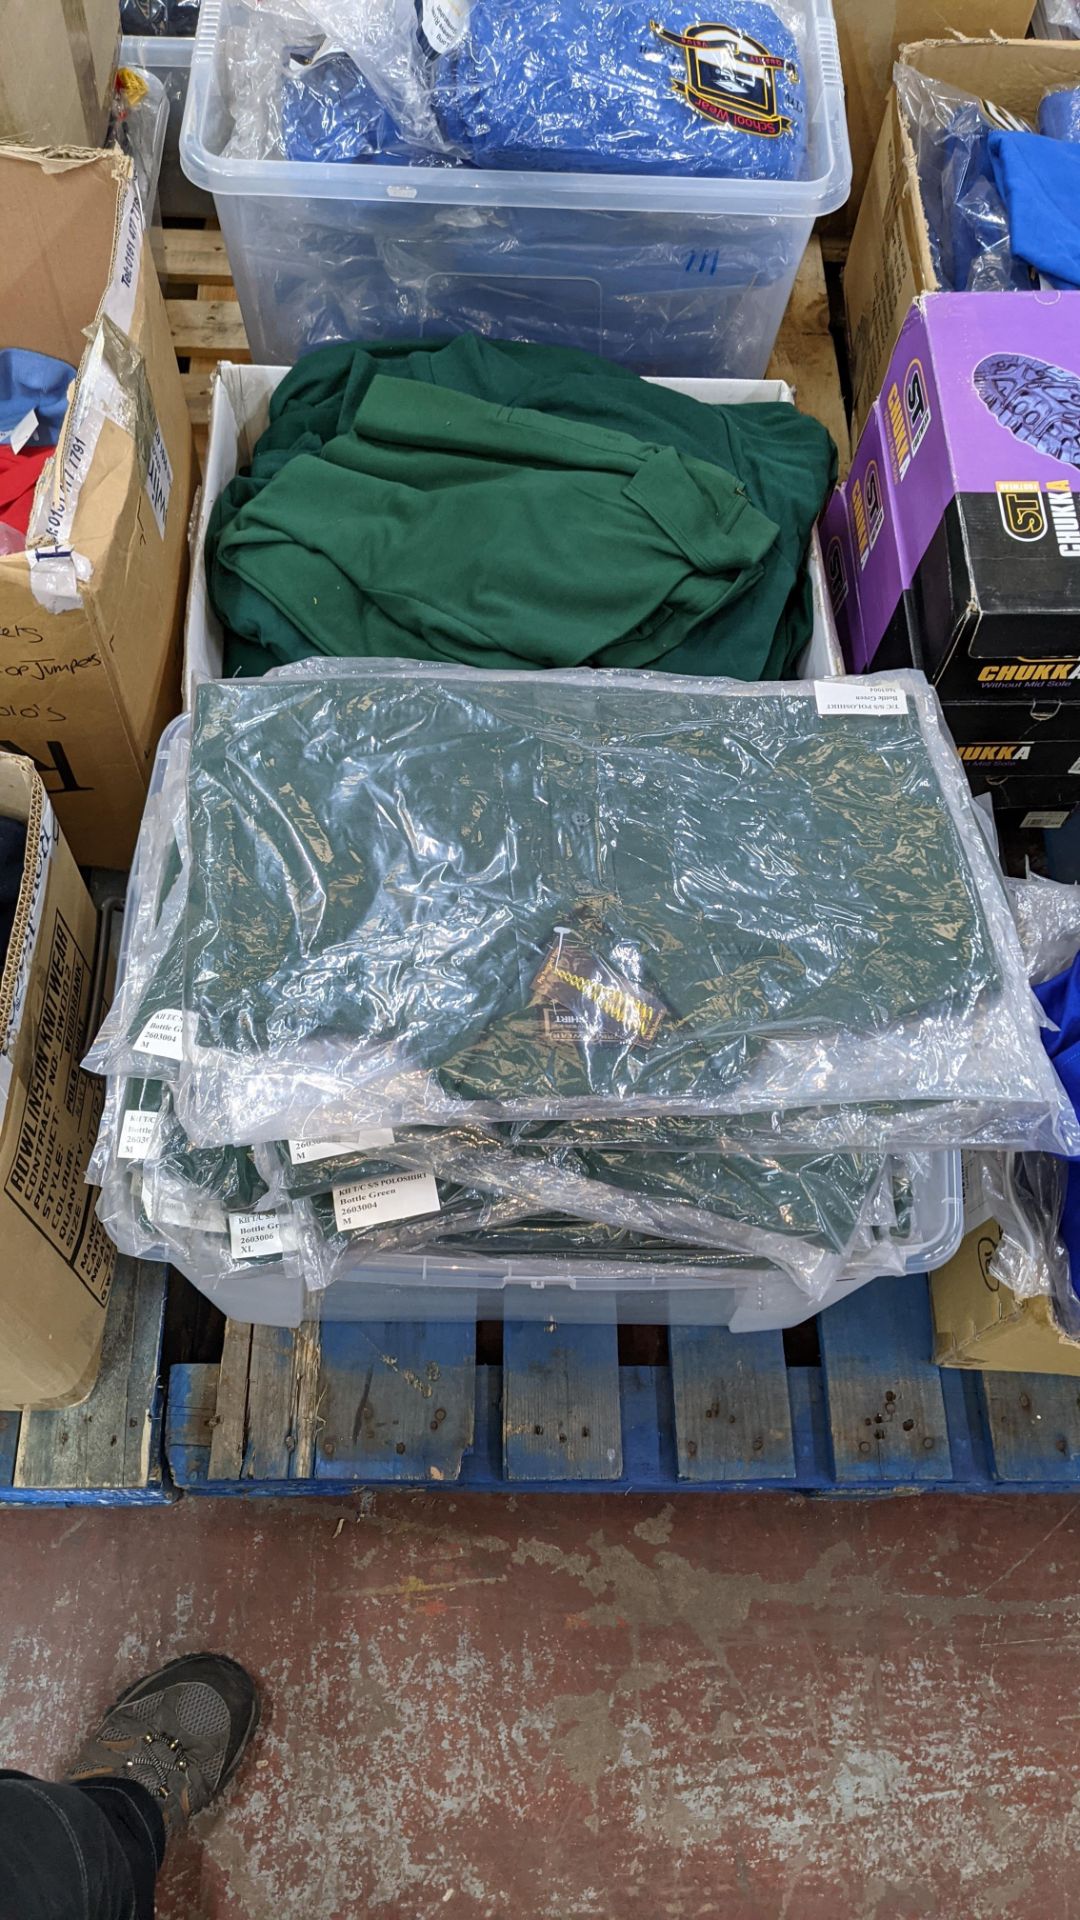 Approx 80 off green polo shirts & sweatshirts - the contents of 2 boxes/crates. NB boxes/crates exc